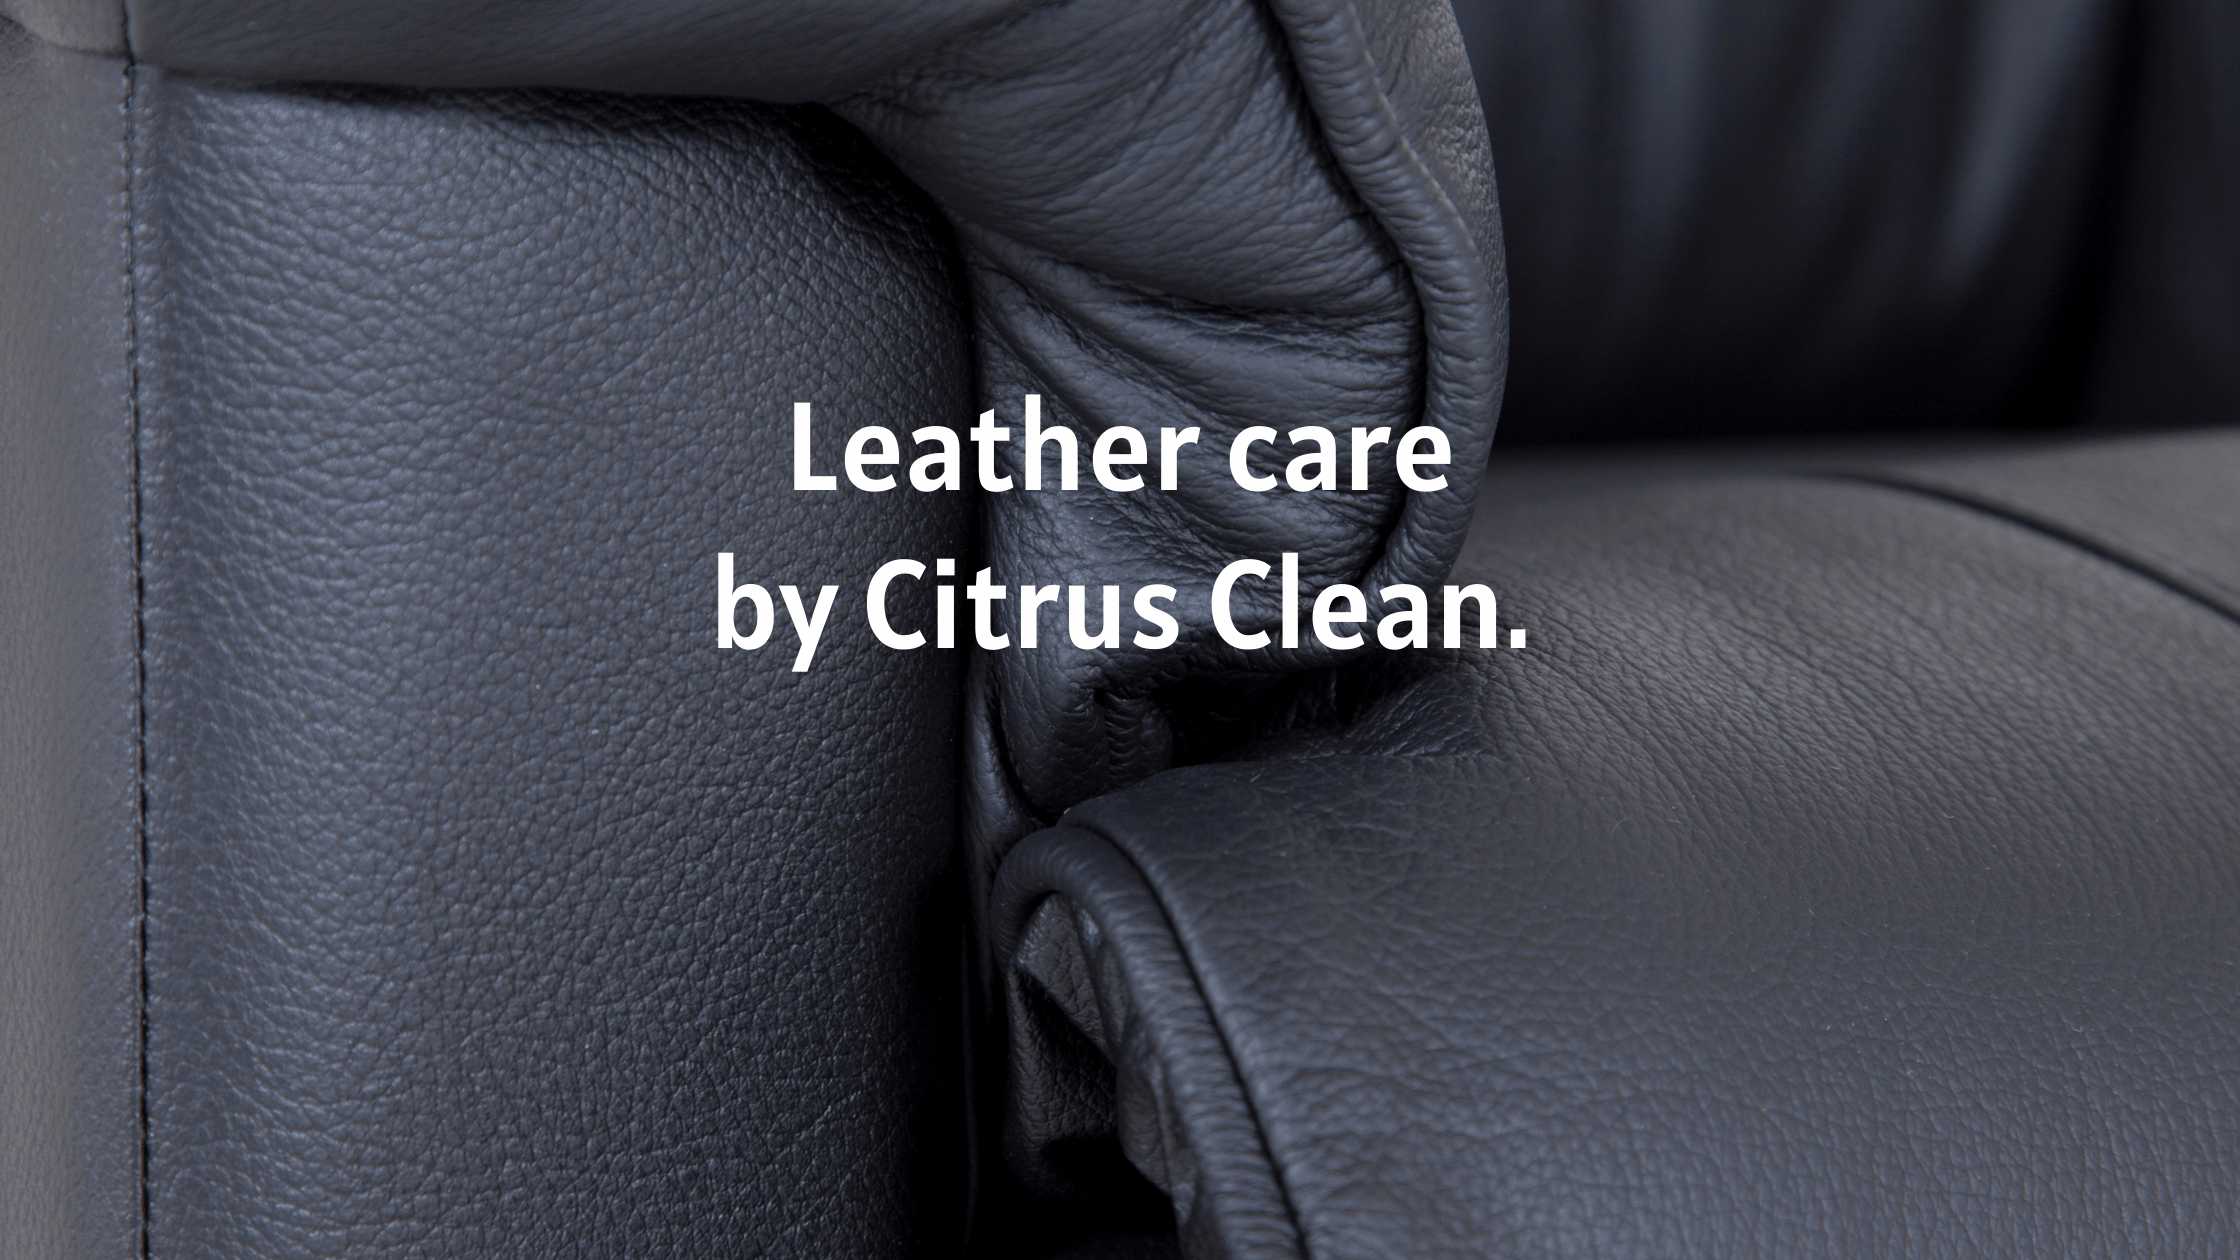 Introducing Leather care by Citrus Clean 4